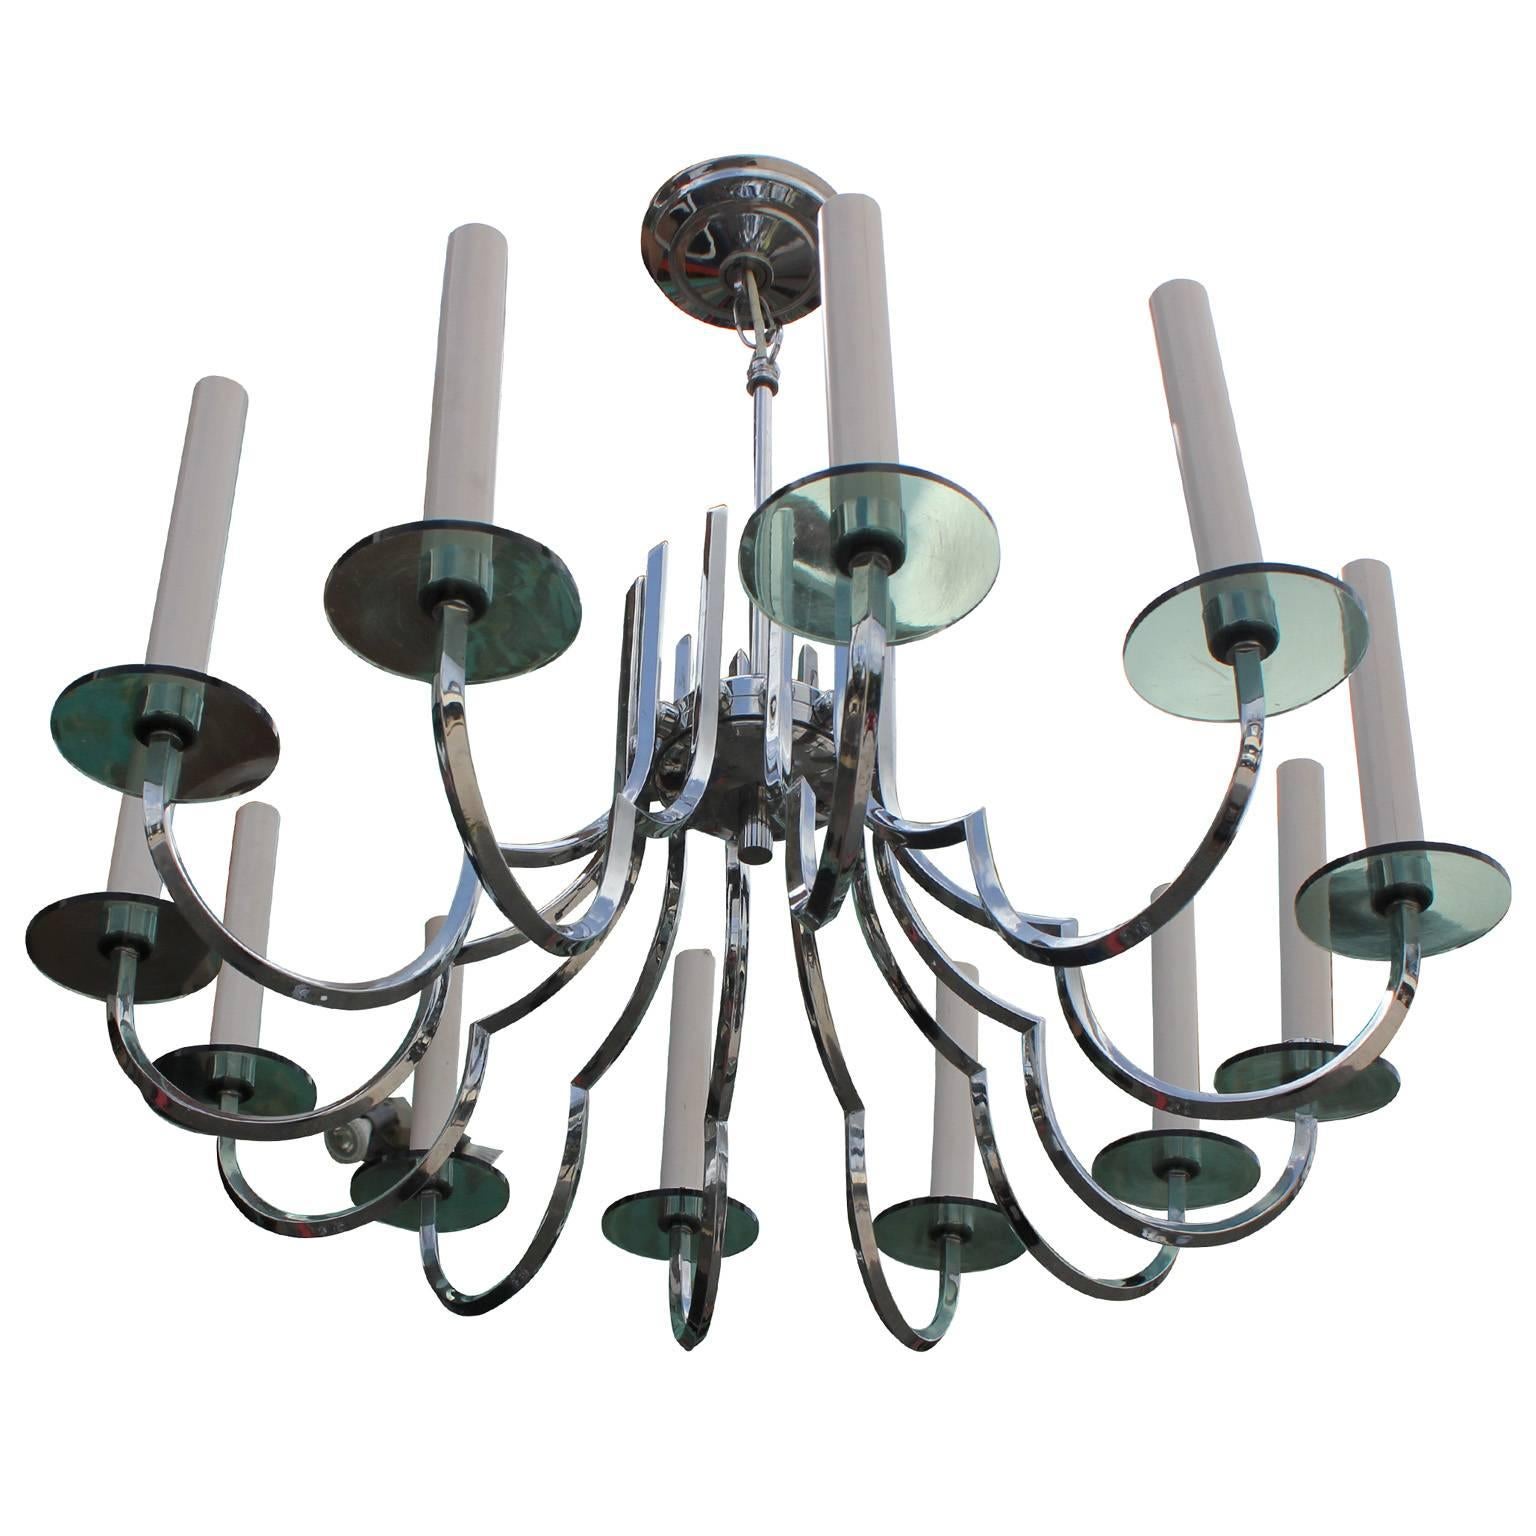 Fabulous chrome chandelier with smoked glass details. Chandelier has Classic lines made interesting with bold materials. Perfect in a Hollywood Regency, Midcentury or Modern Space.